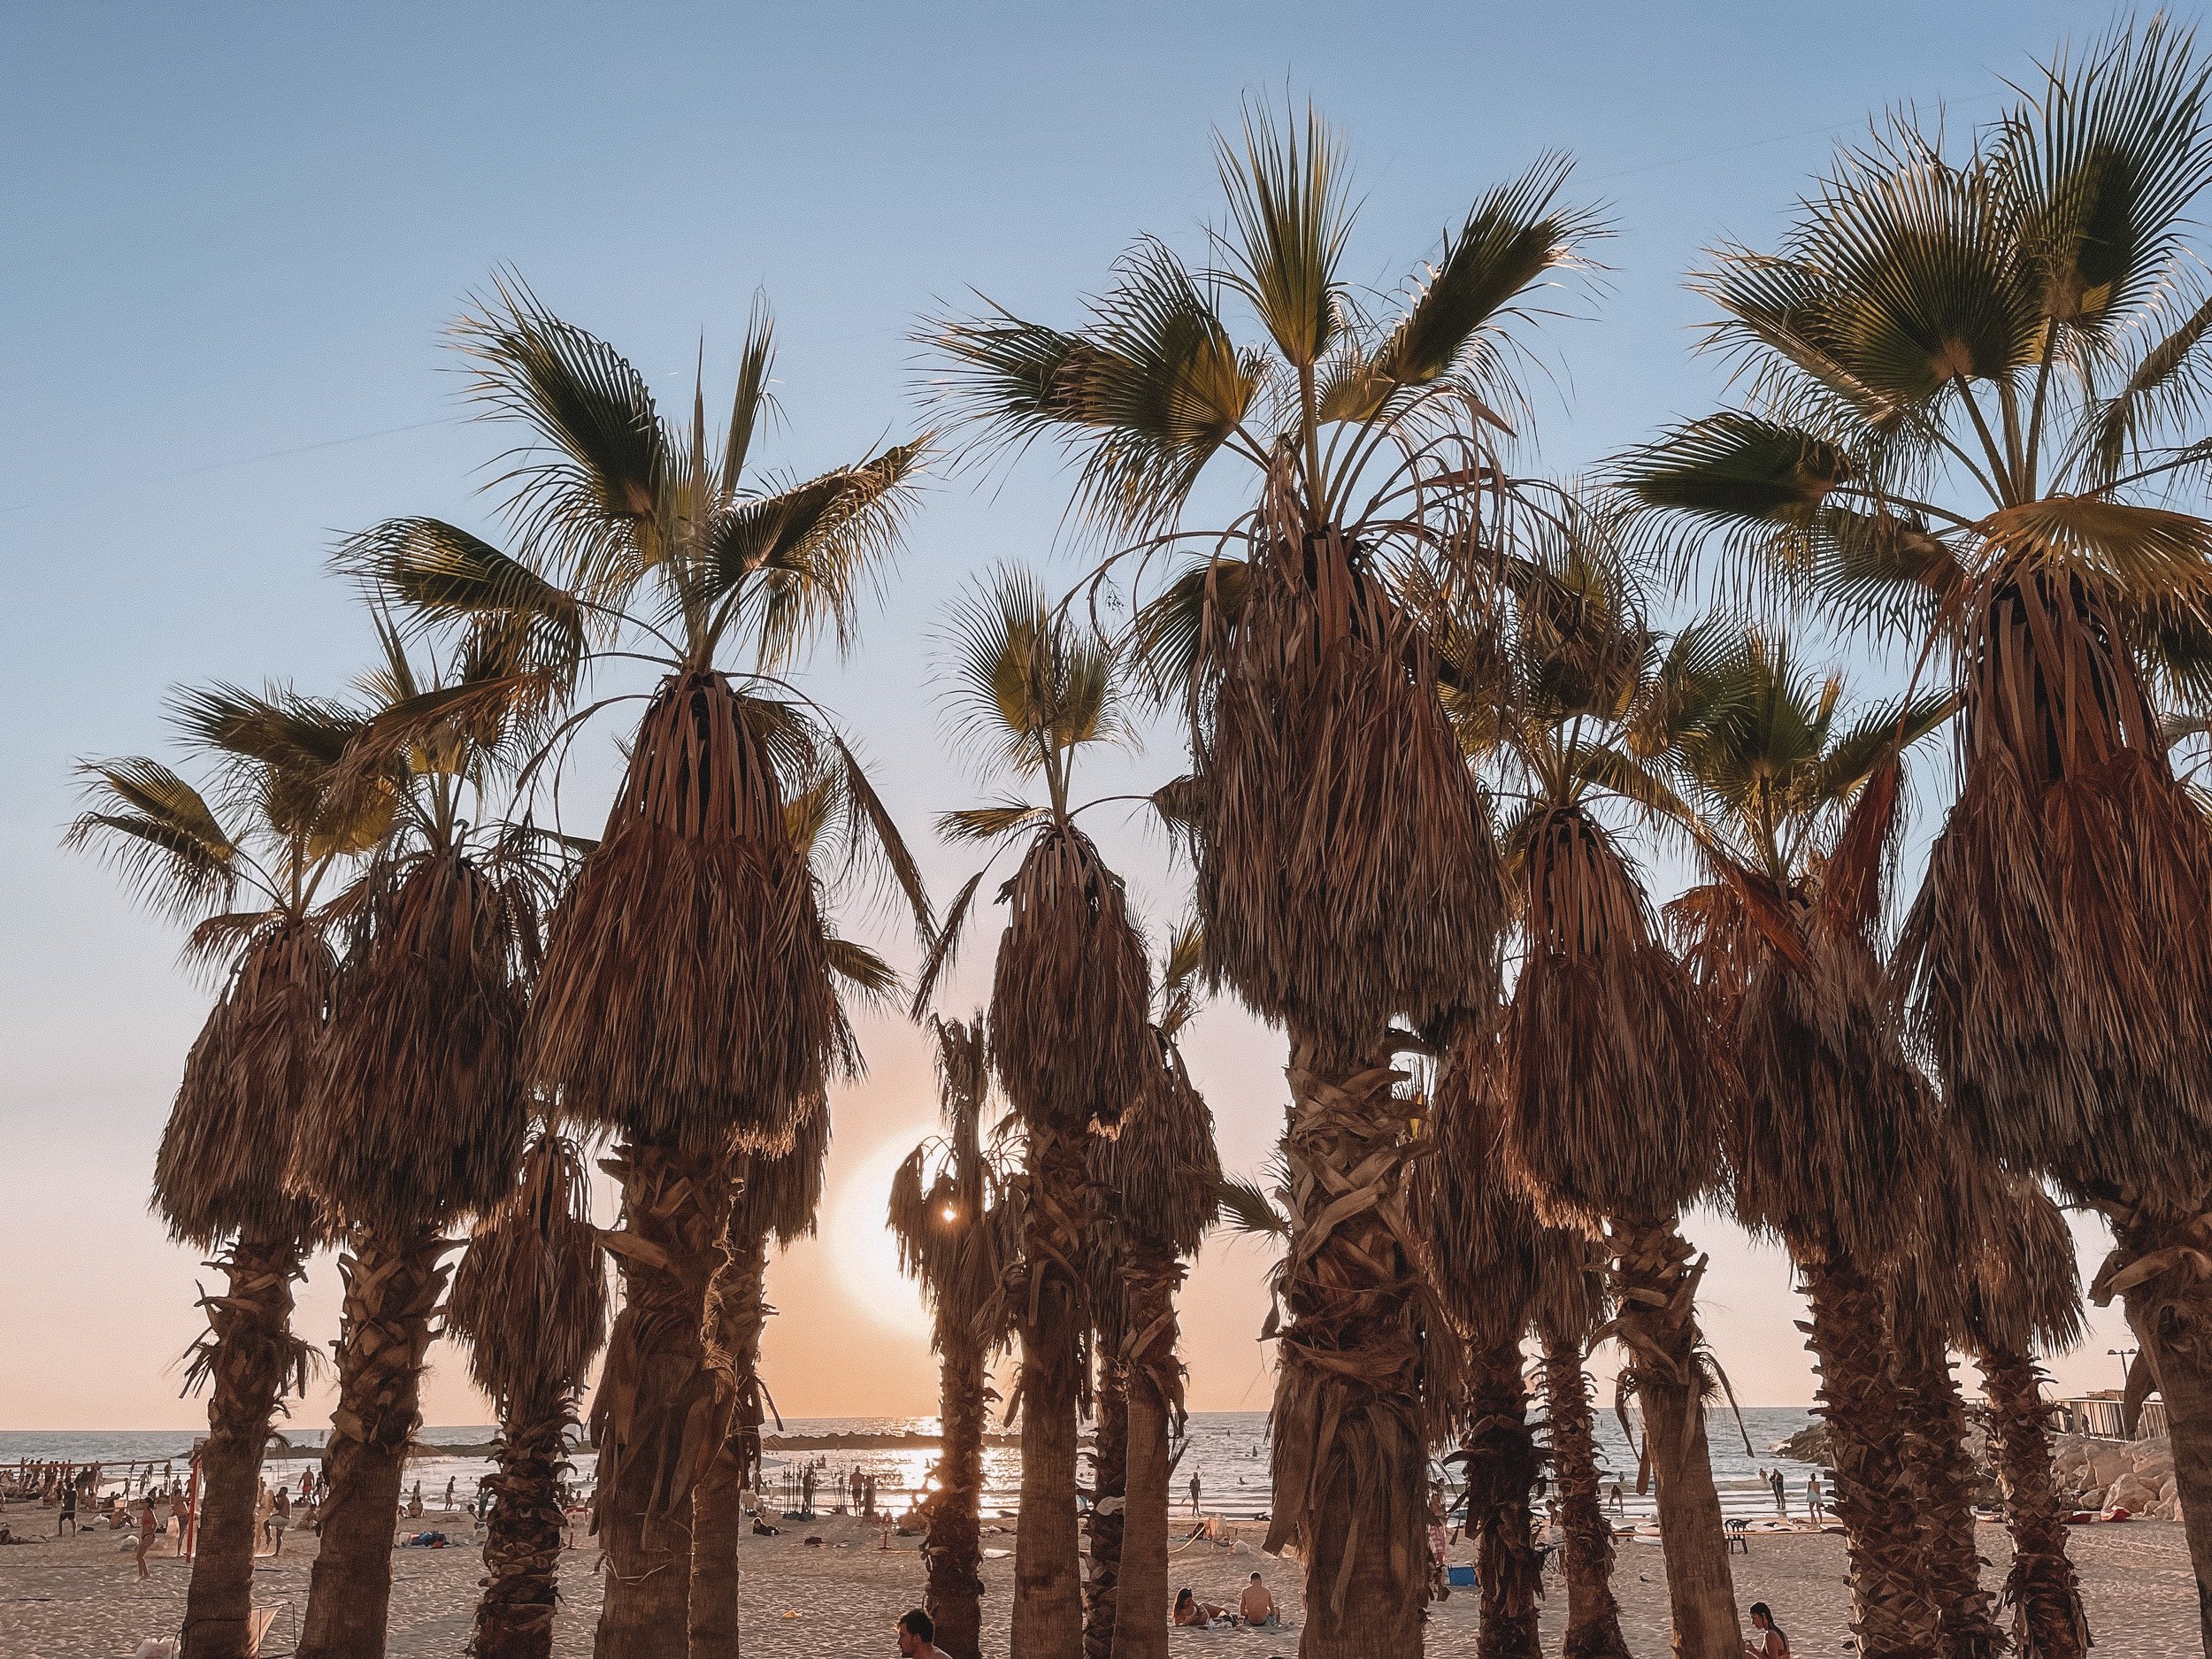 Stunning sunset by the beach with palm trees - Tel Aviv - Israel